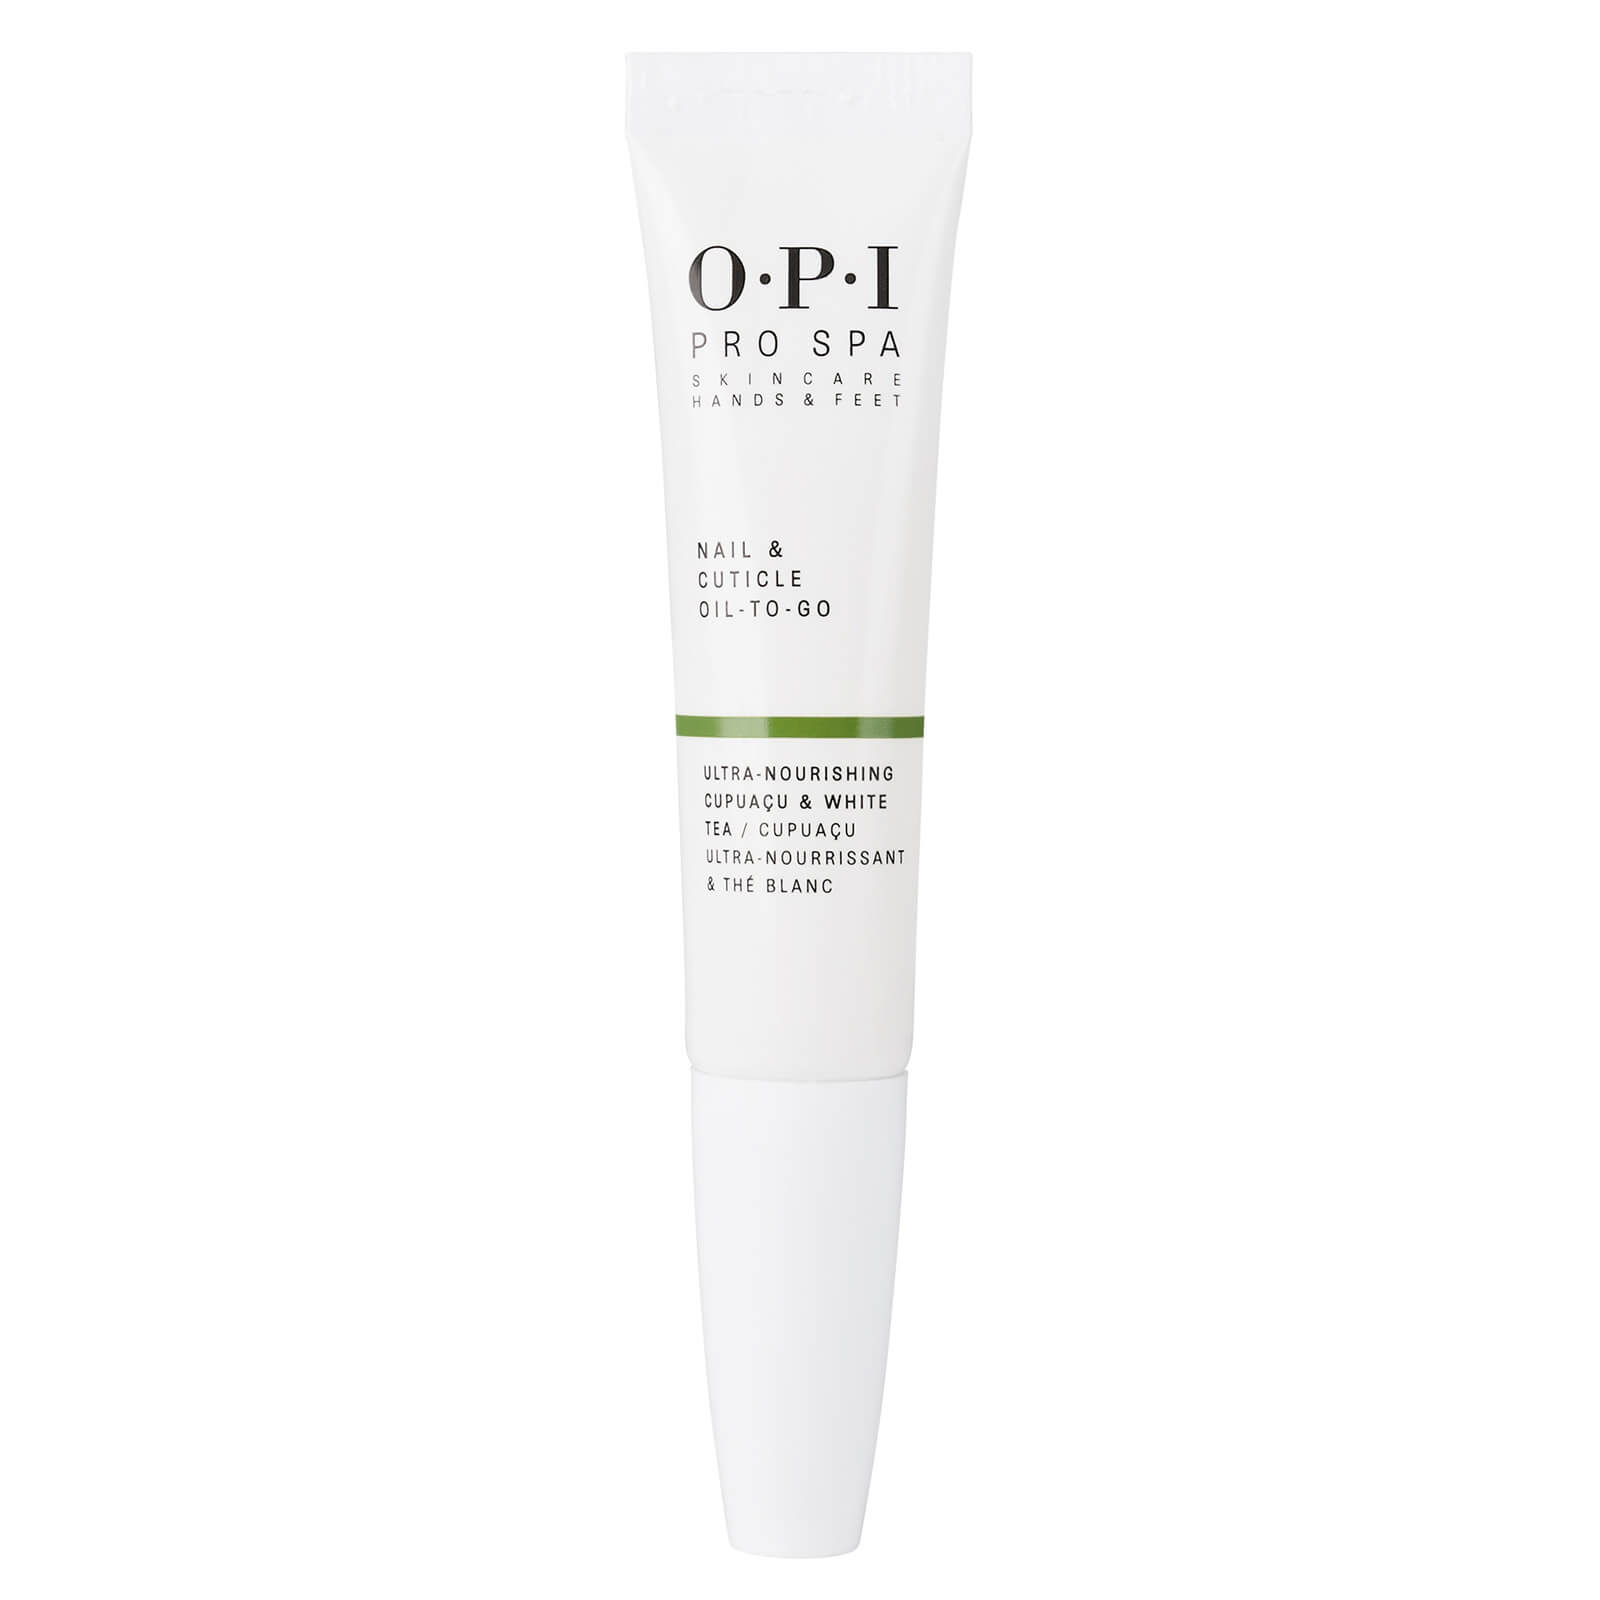 OPI PROSPA NAIL AND CUTICLE OIL TO-GO 7.5ML,22006698000